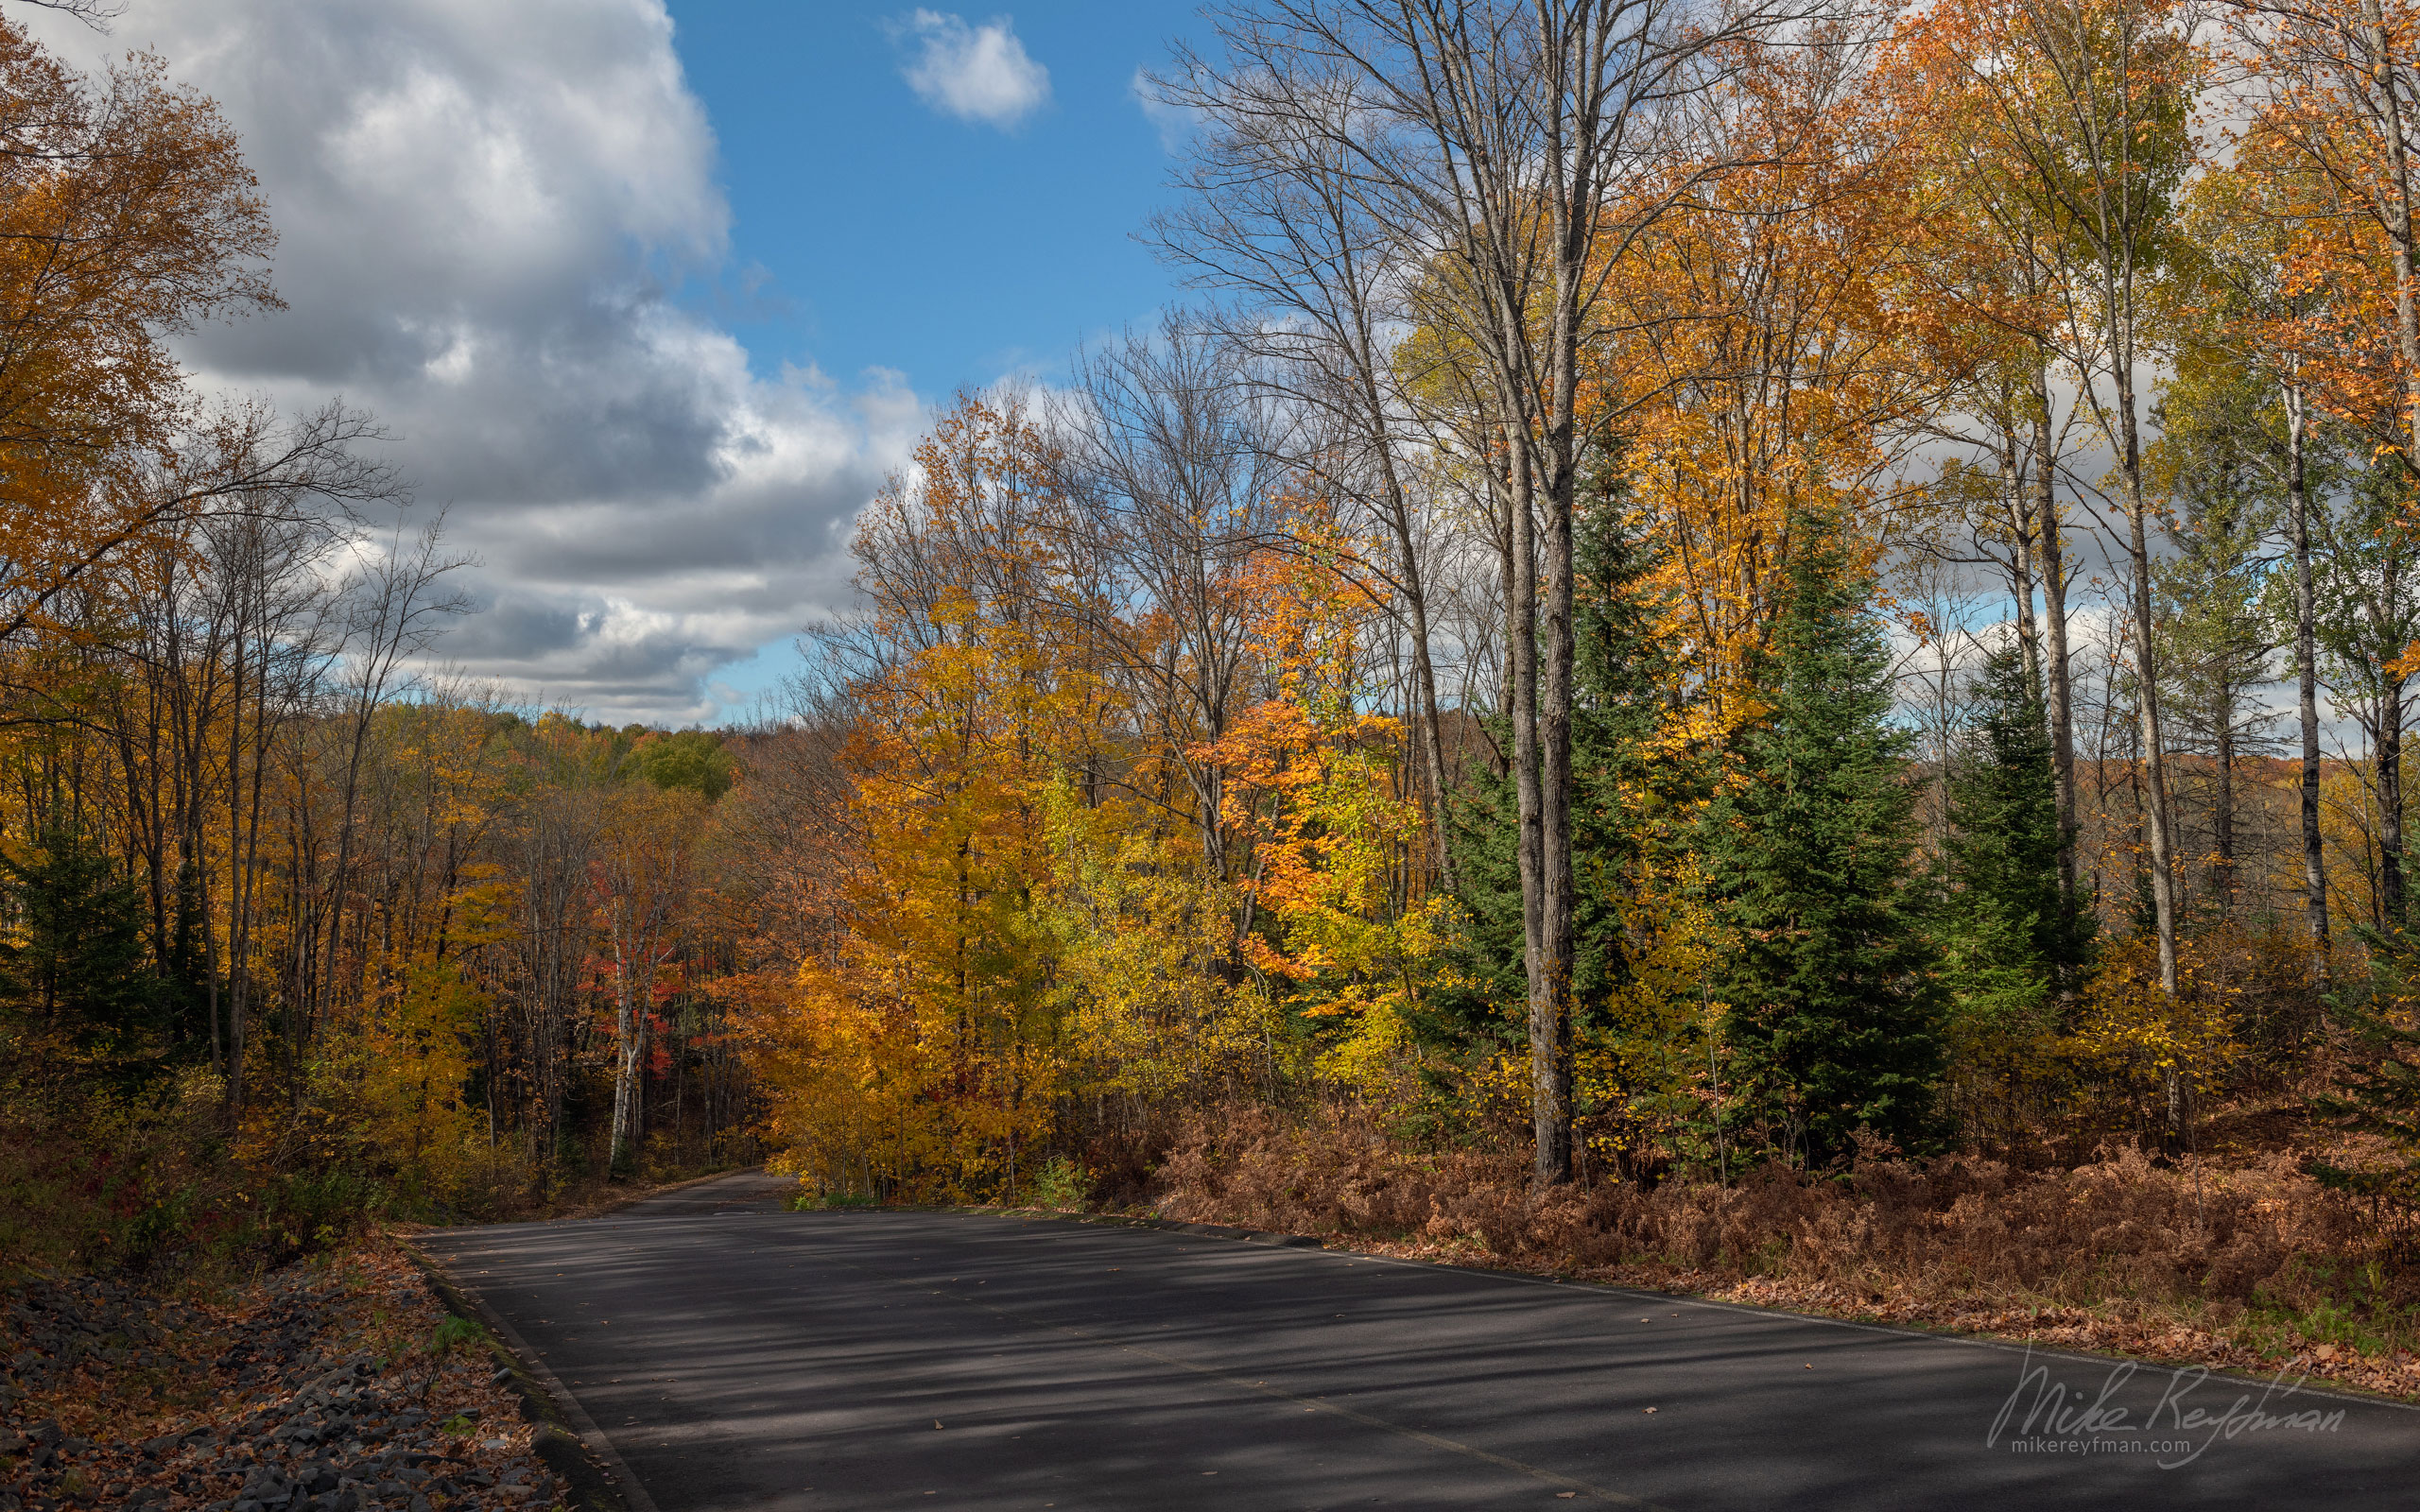  UP-MI_073_50E3380.jpg - Michigan's Upper Peninsula - the best destination in US for fall colors. - Mike Reyfman Photography